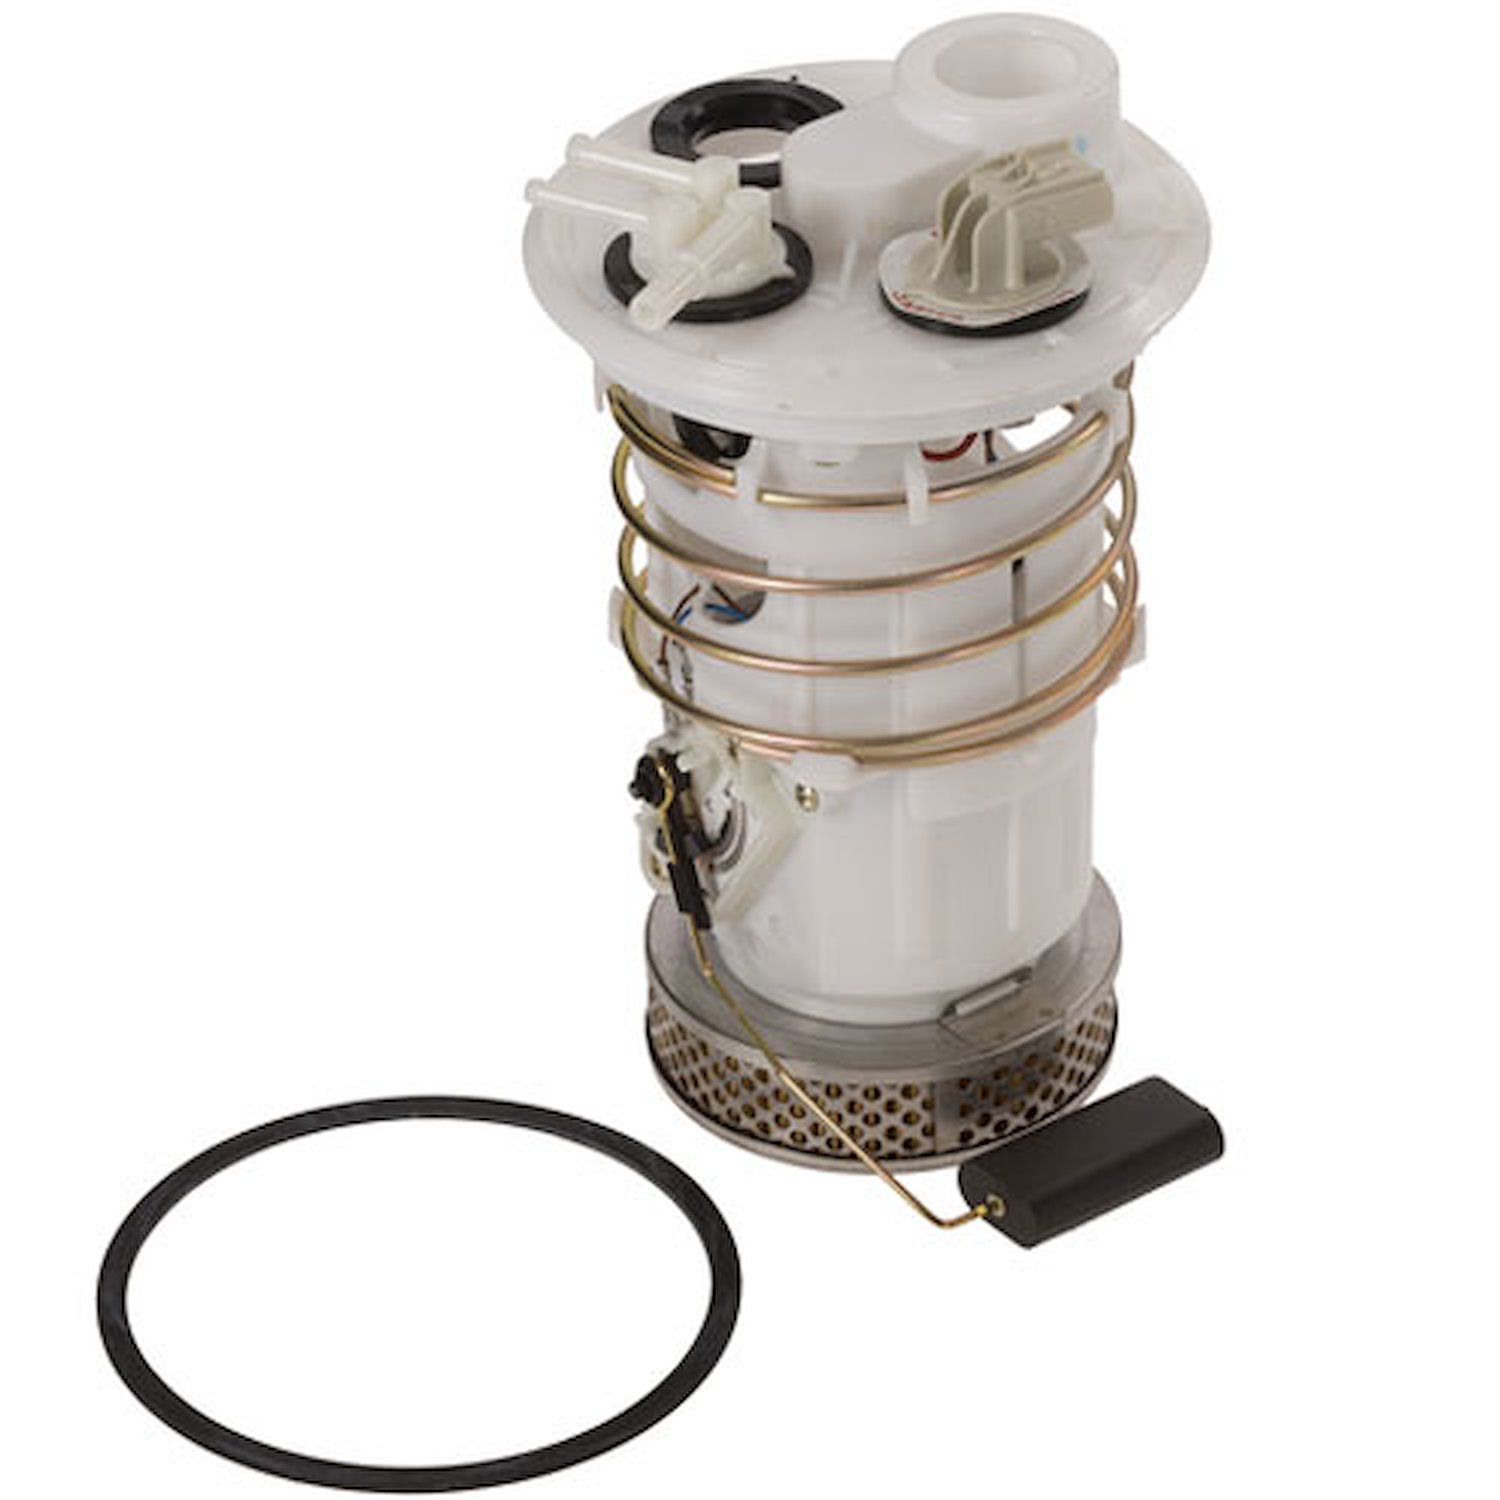 For 1992 Plymouth Grand Voyager V6 3.0 3.3 Fuel Pump Module Assembly